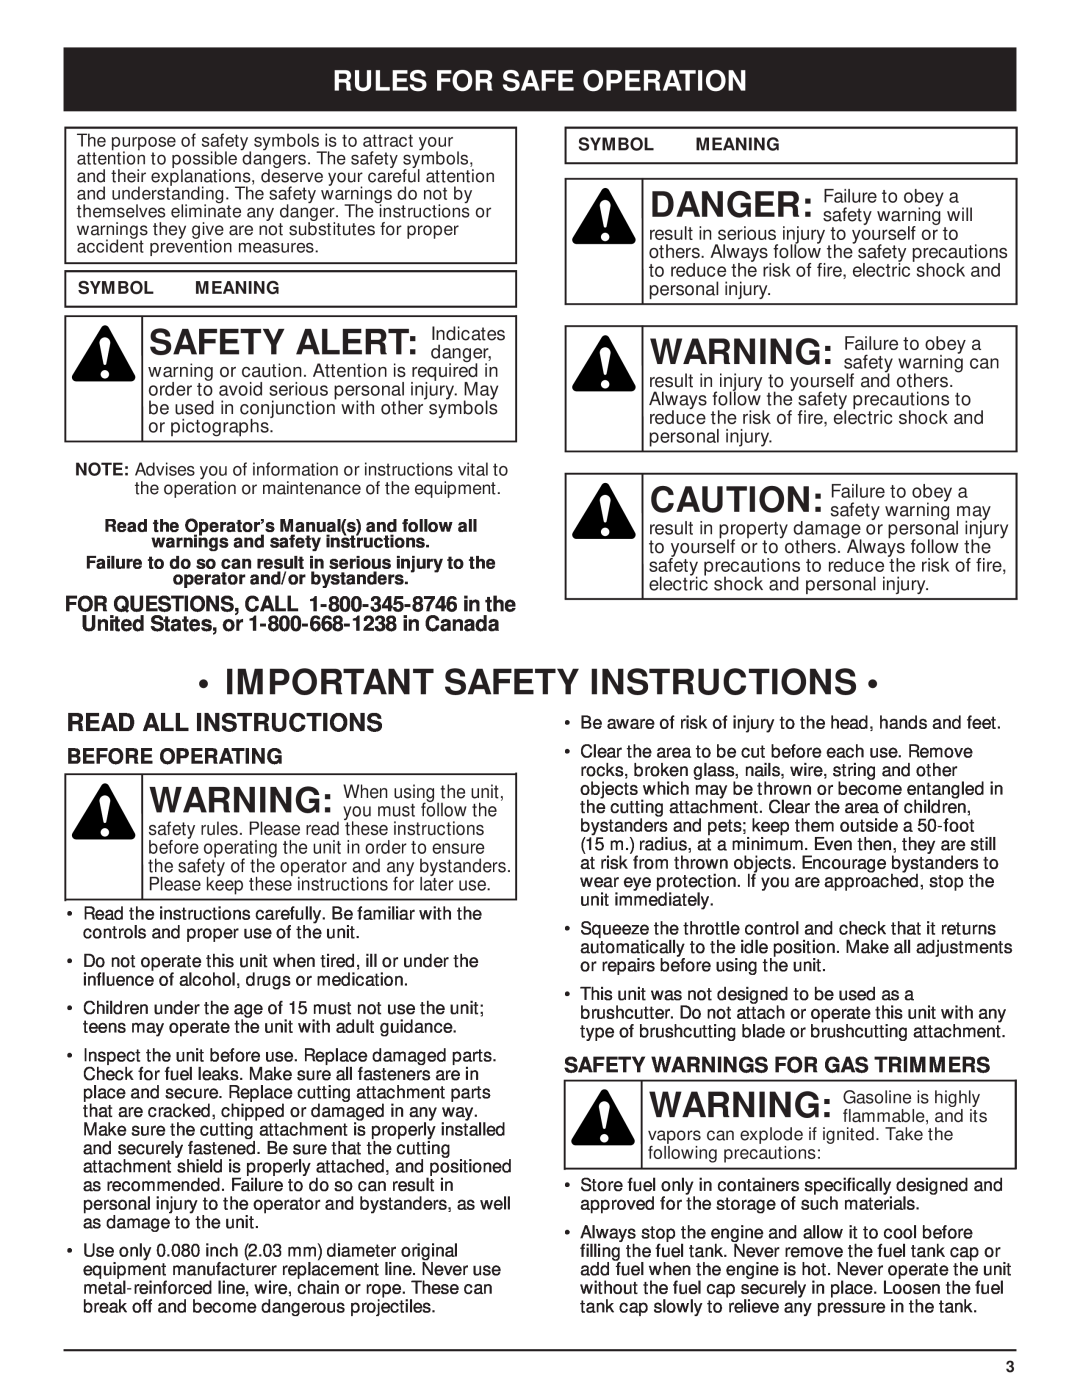 MTD Y28 Important Safety Instructions, Rules For Safe Operation, Read All Instructions, Before Operating, Symbol Meaning 